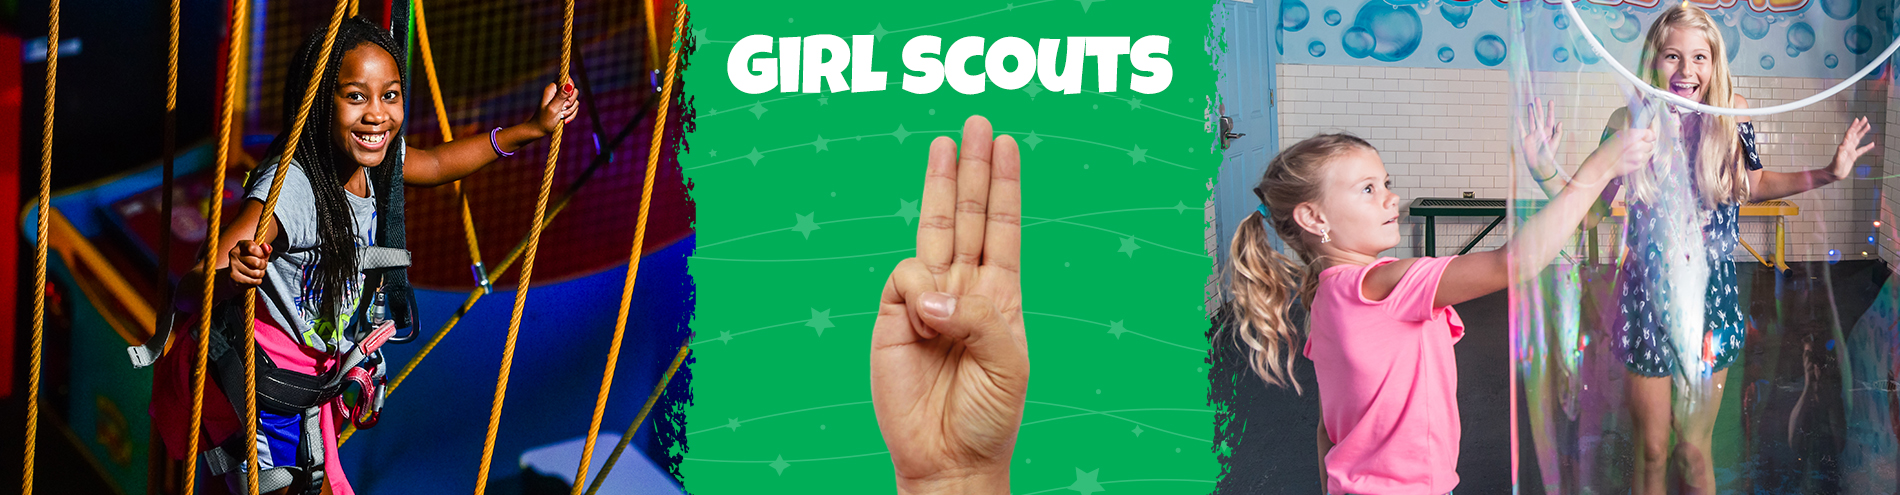 Girl Scouts Header